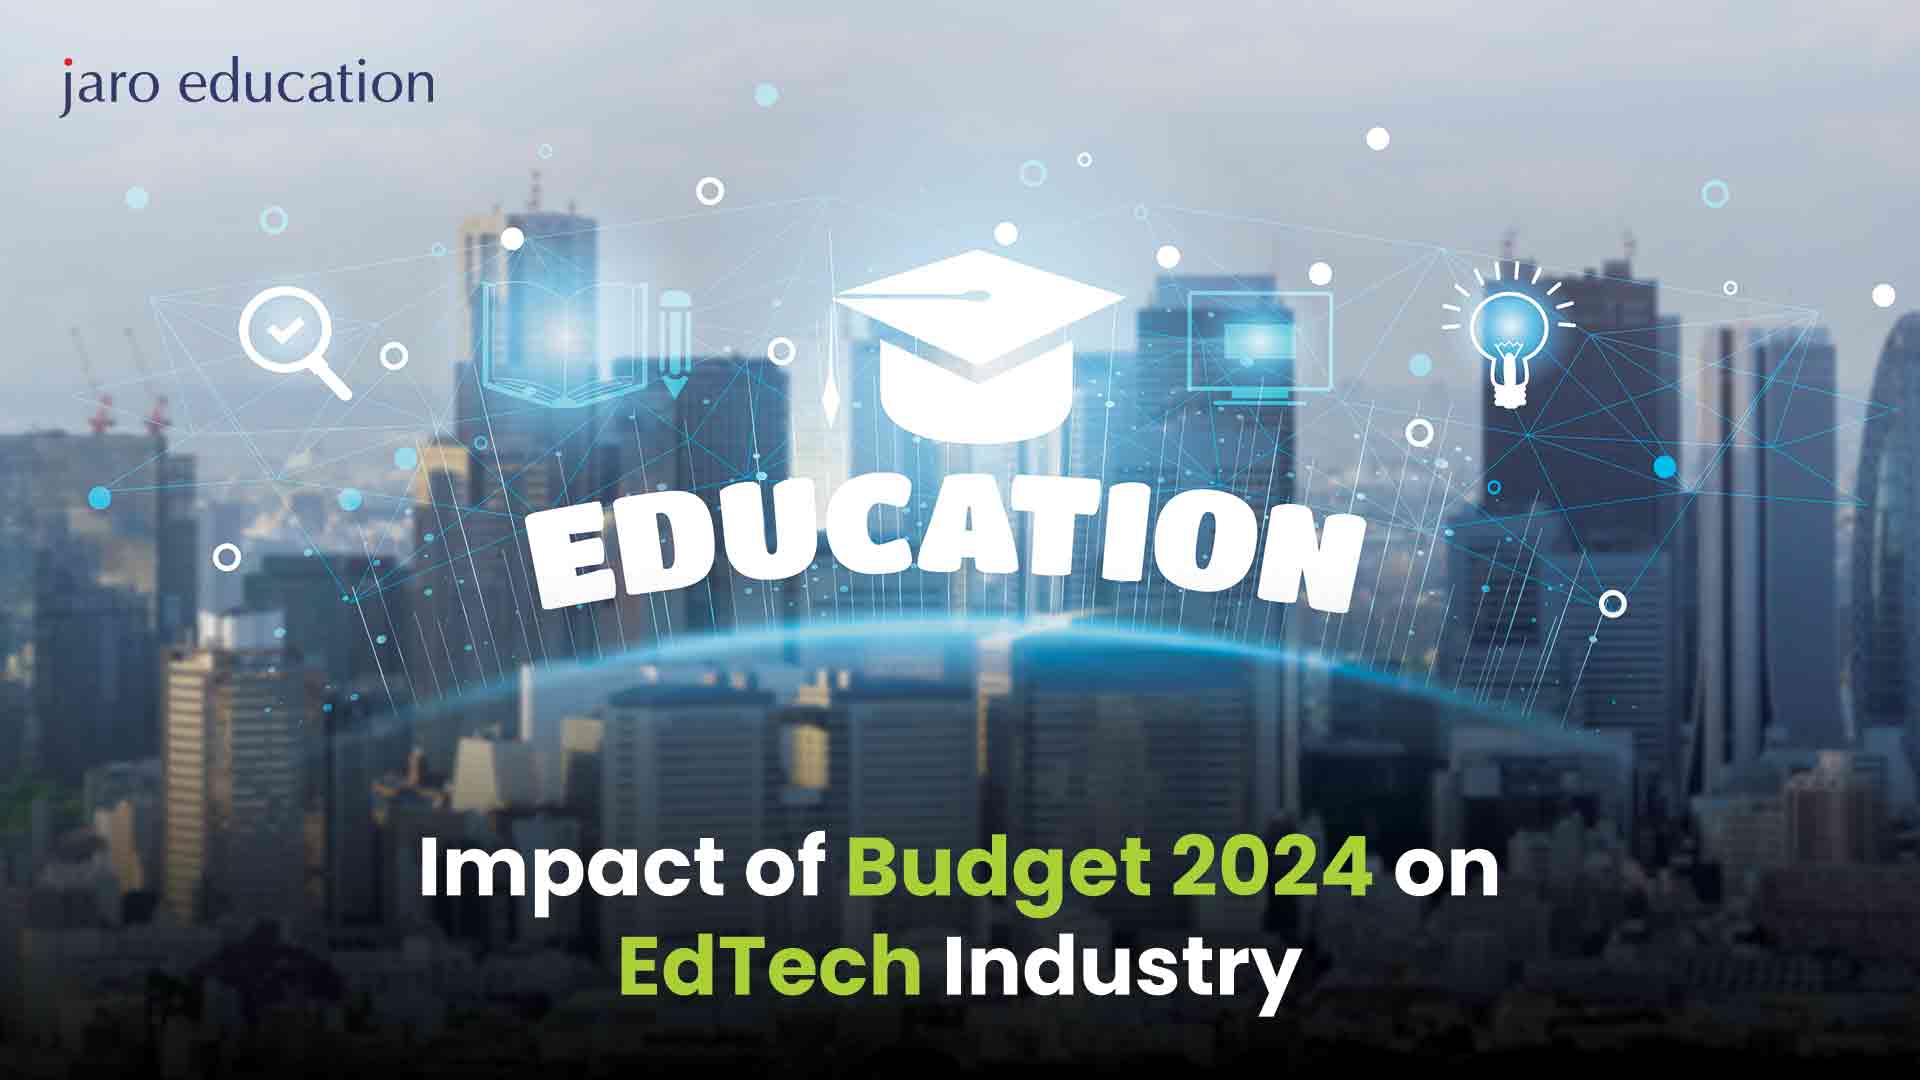 Impact of Budget 2024 on EdTech Industry